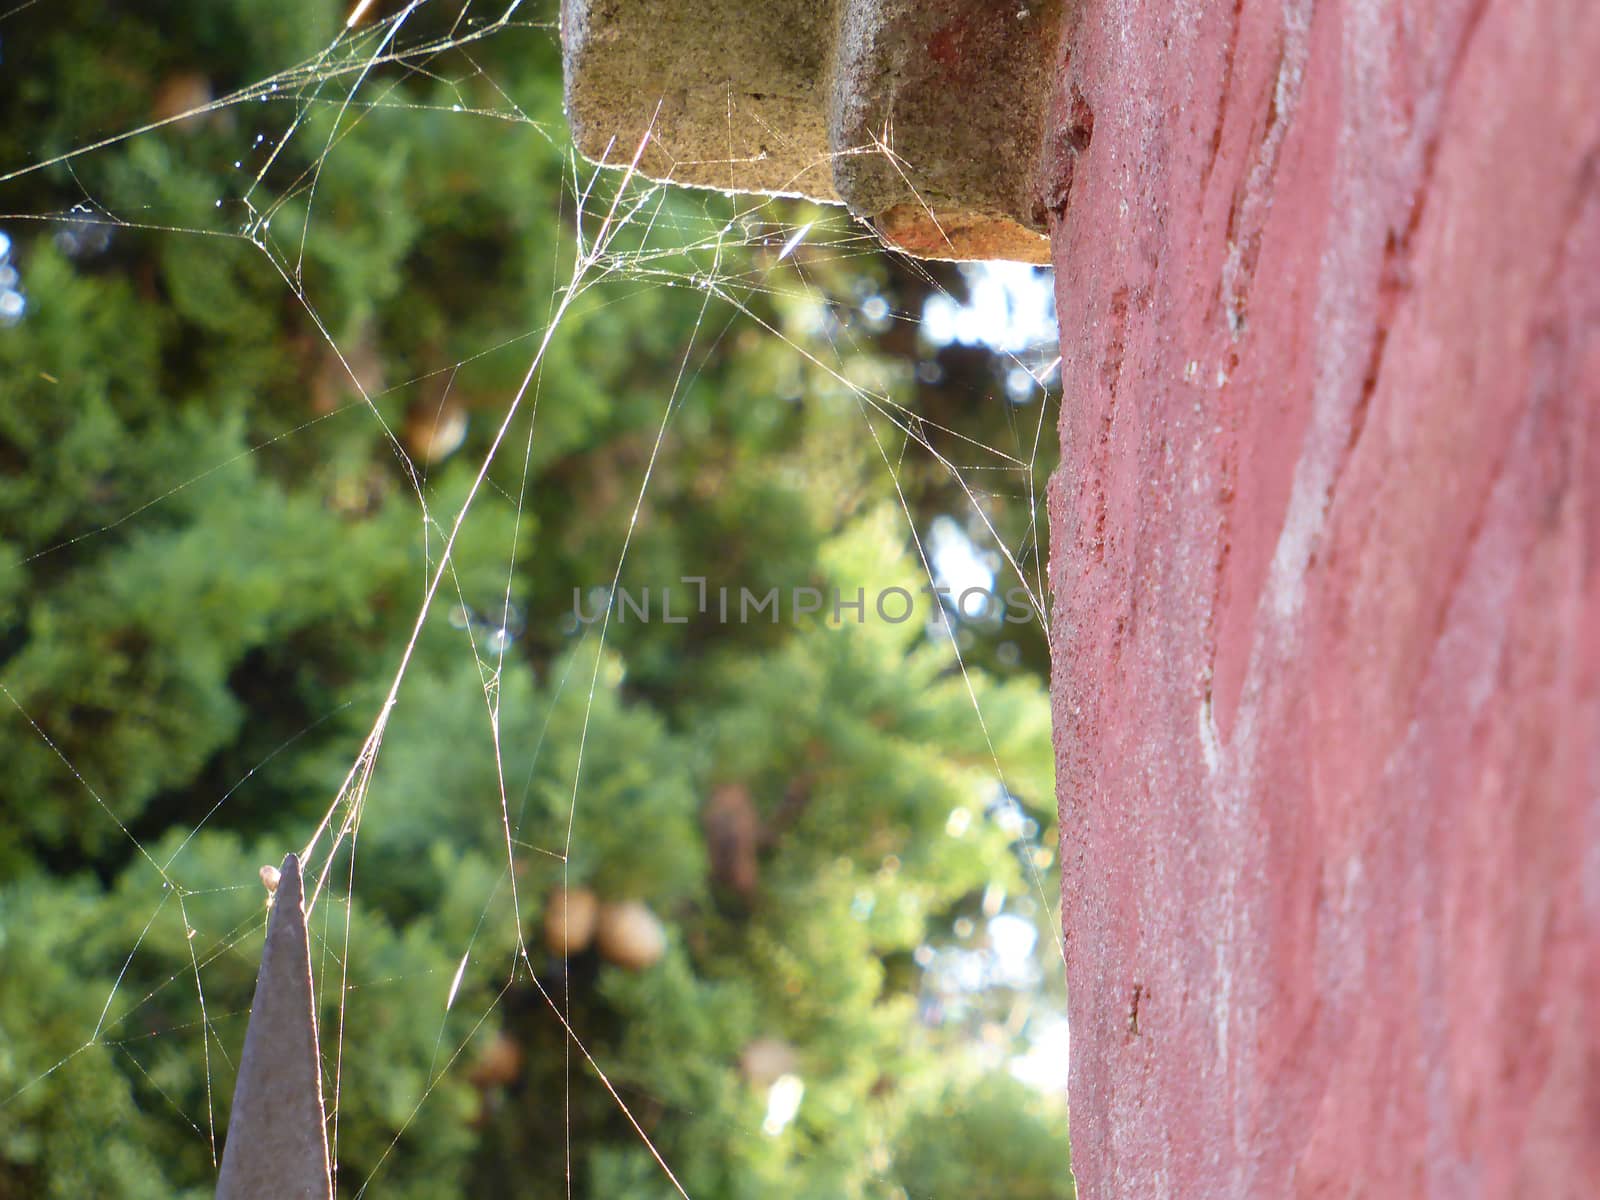 Spiderweb between iron cape and old wall in the sunlight